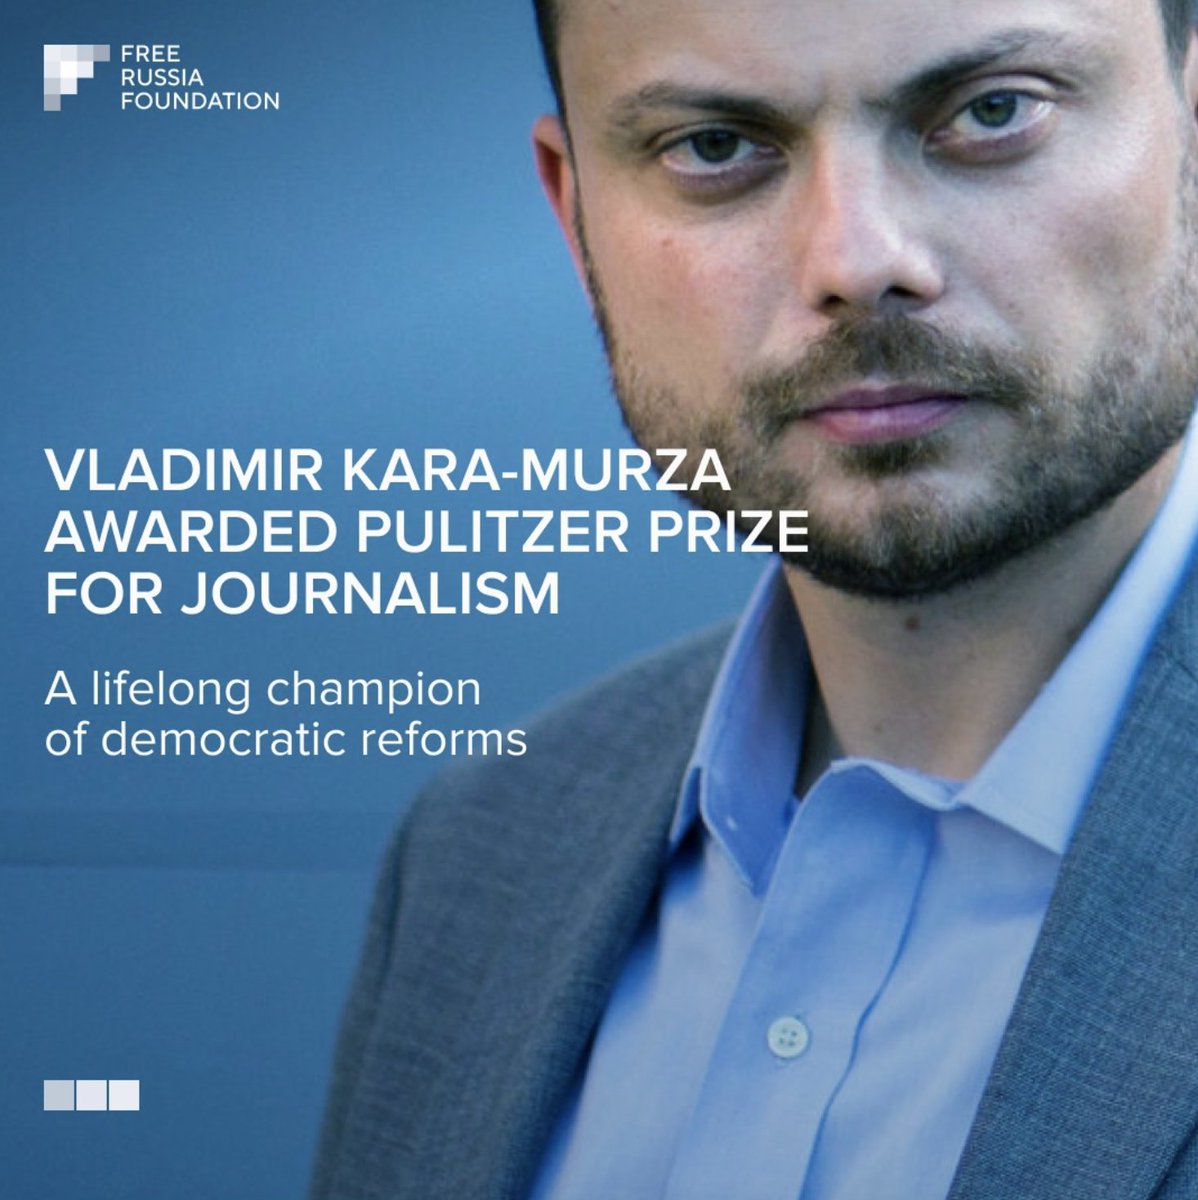 1/ Russia’s Vladimir Kara-Murza Awarded Pulitzer Prize for Journalism While Incarcerated and at Increased Risk Thread.